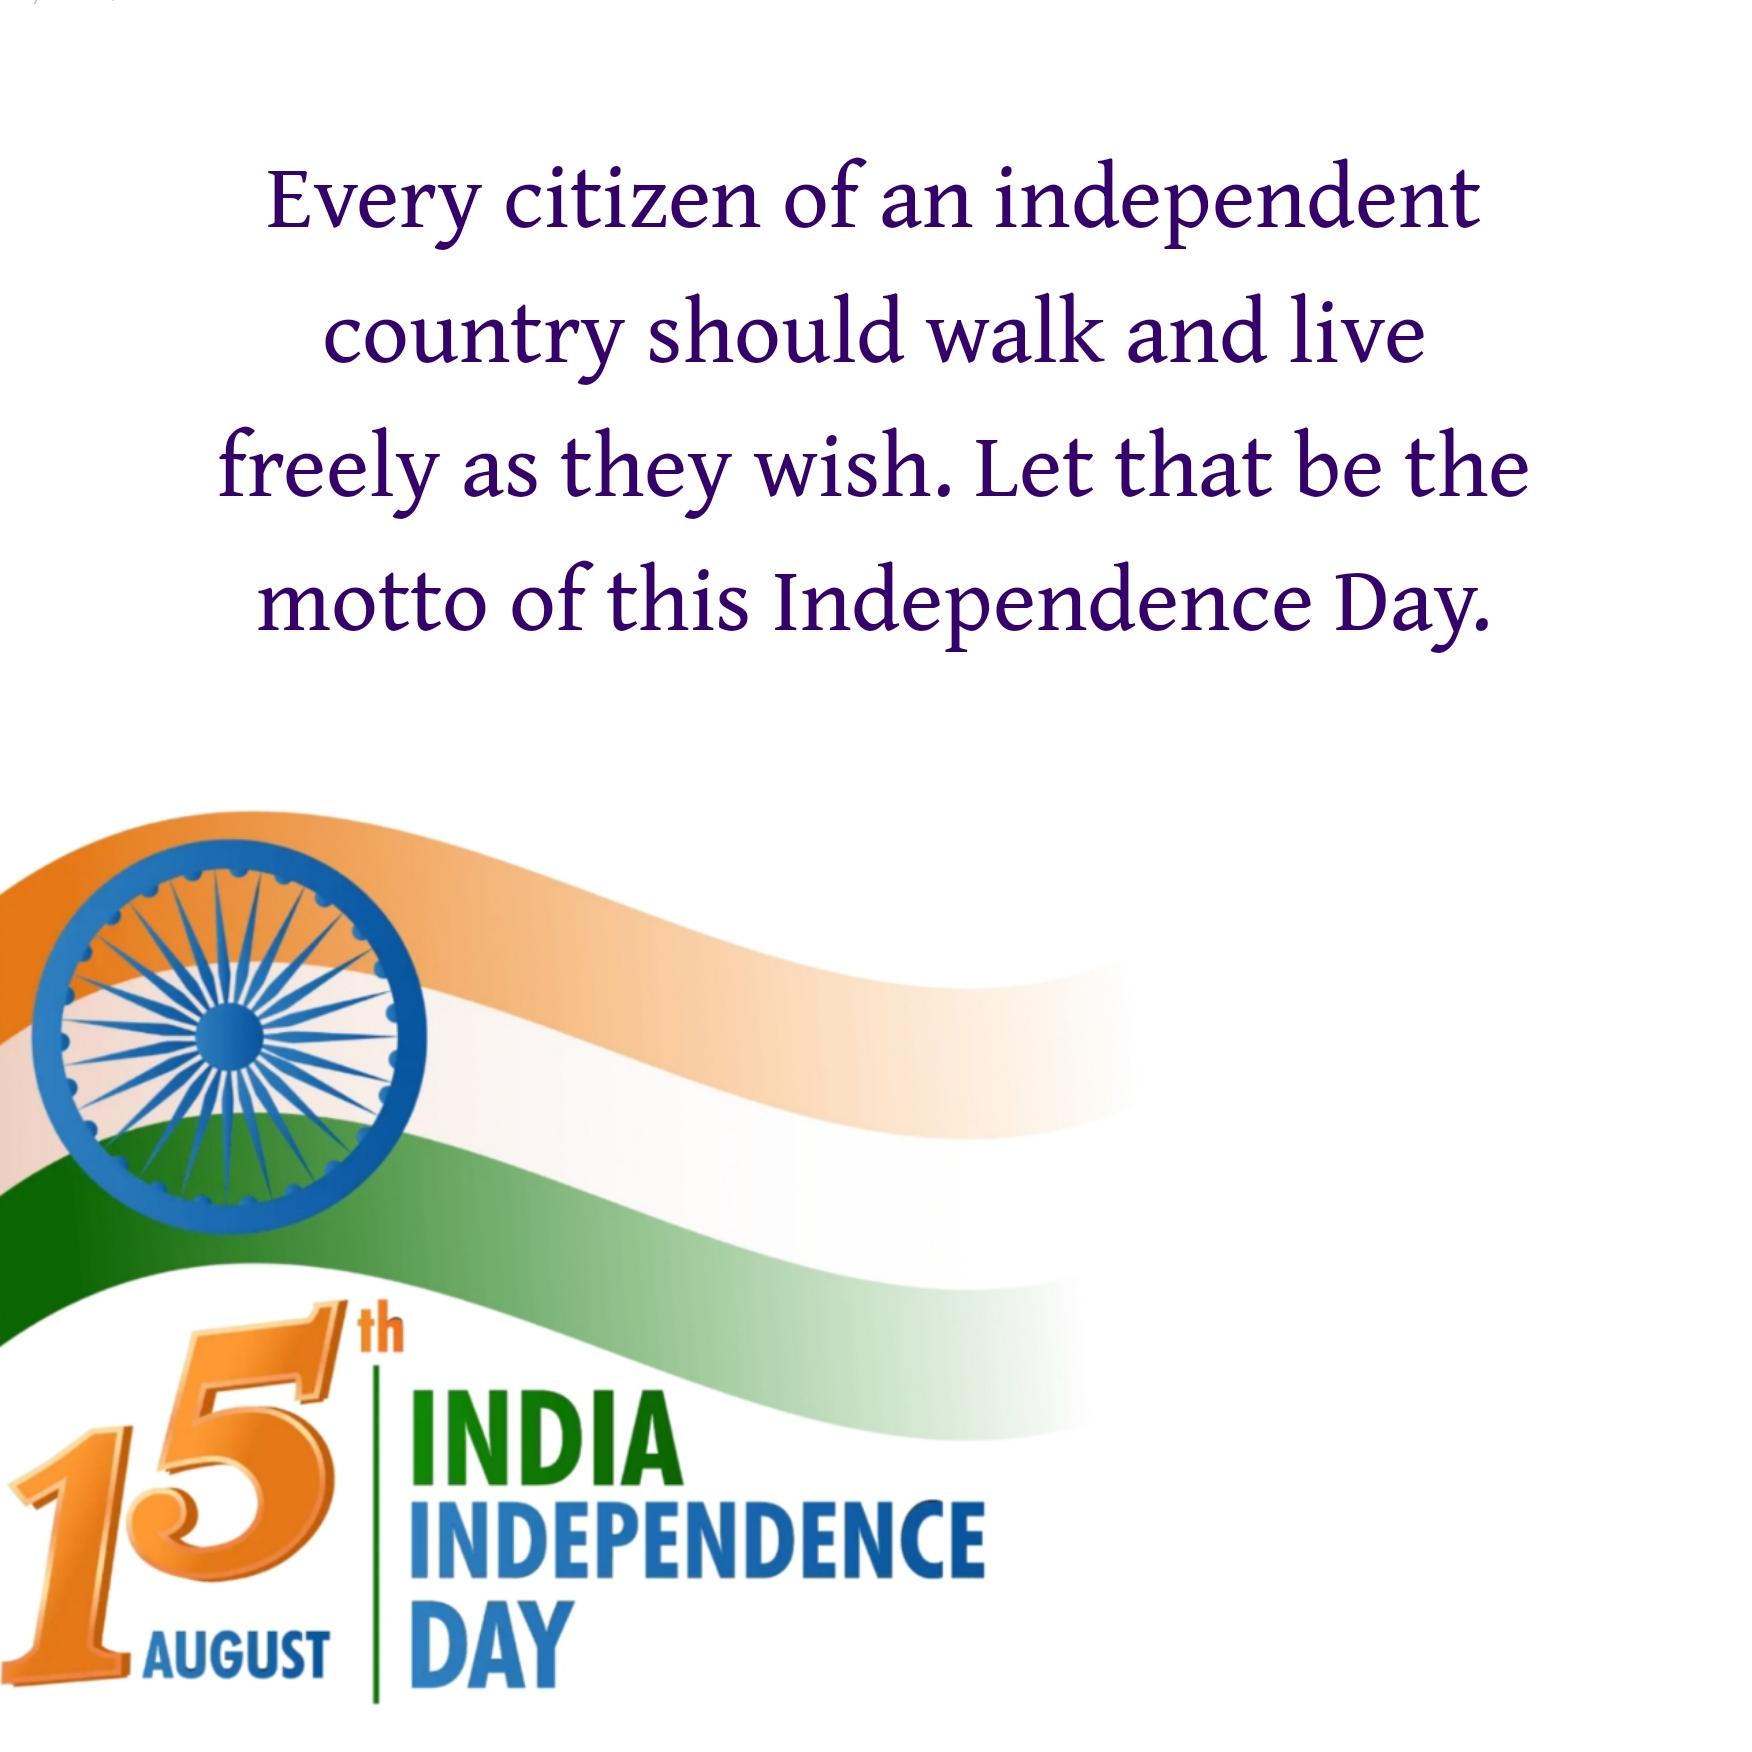 Every citizen of an independent country should walk and live freely